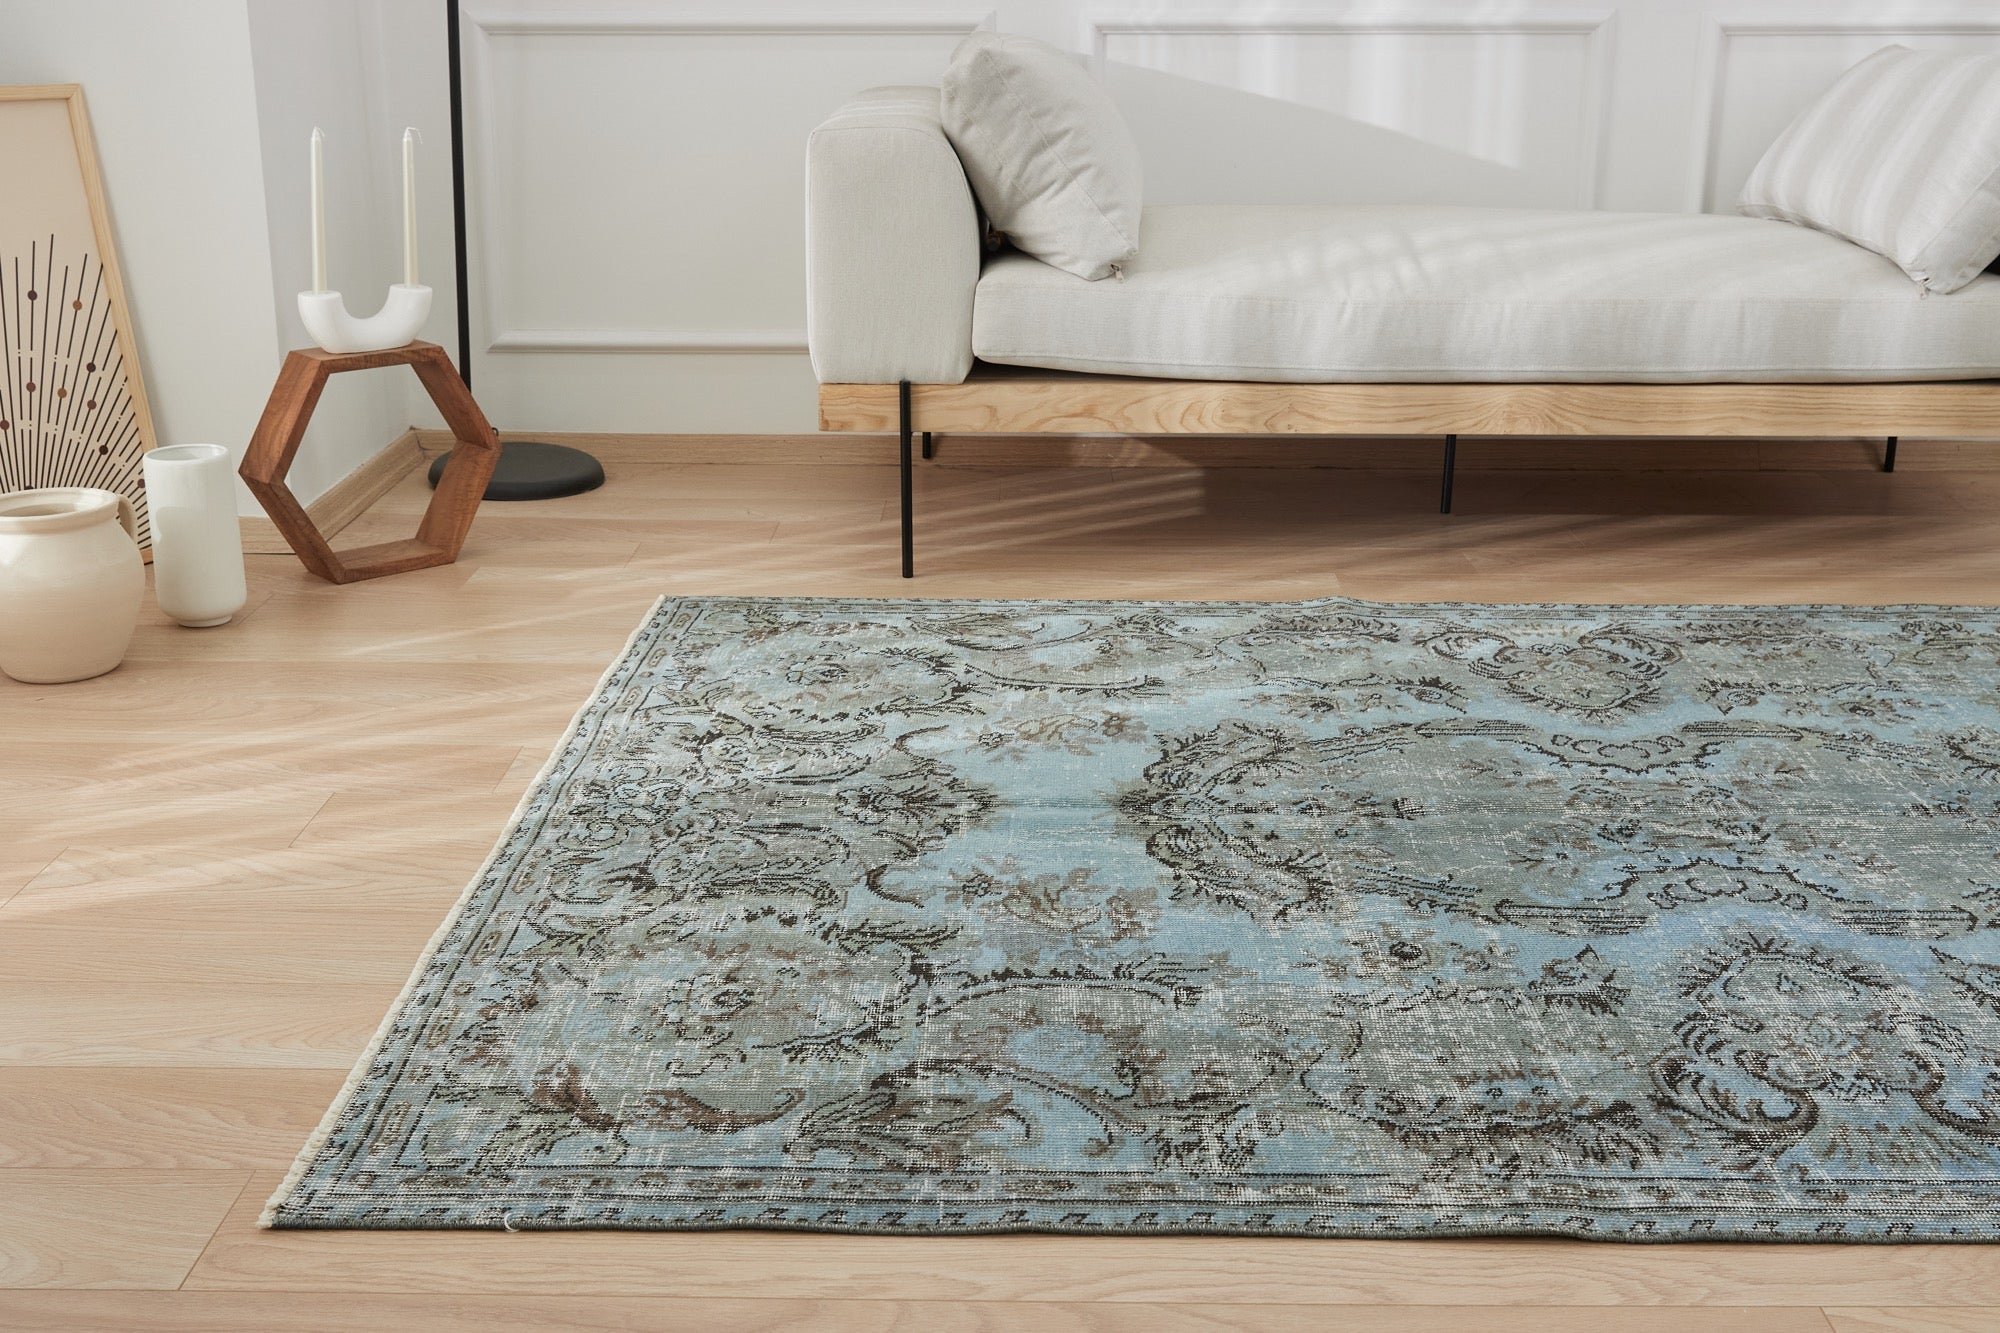 Zaniyah | A Unique Blend of Vintage and Modern Rug Artistry | Kuden Rugs